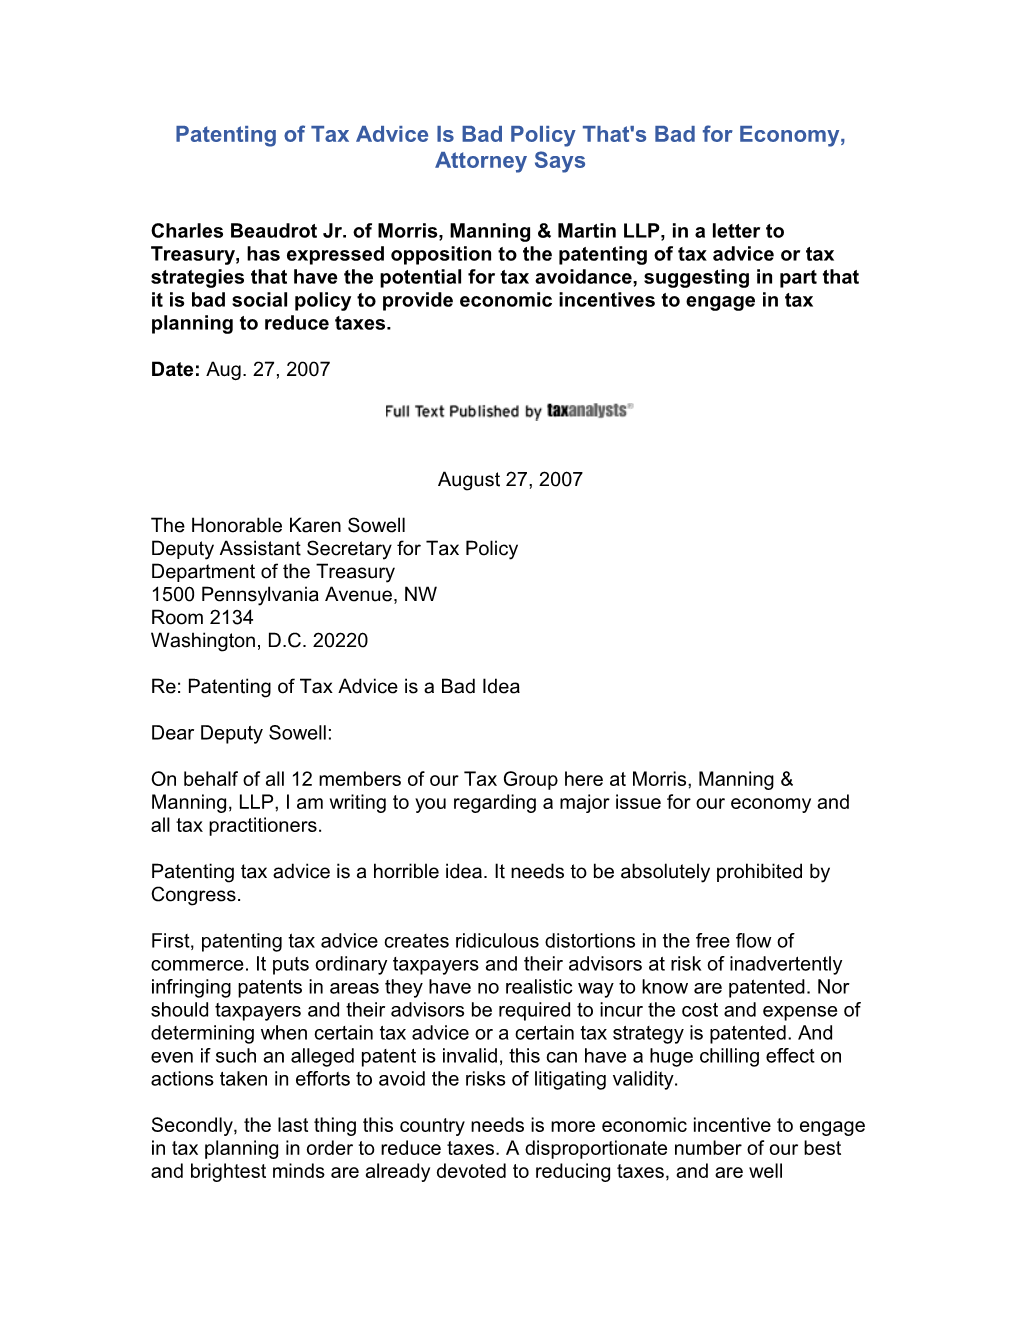 Attorney Letter to Treasury on Patenting of Tax Advice Is Bad Policy - August 27, 2007